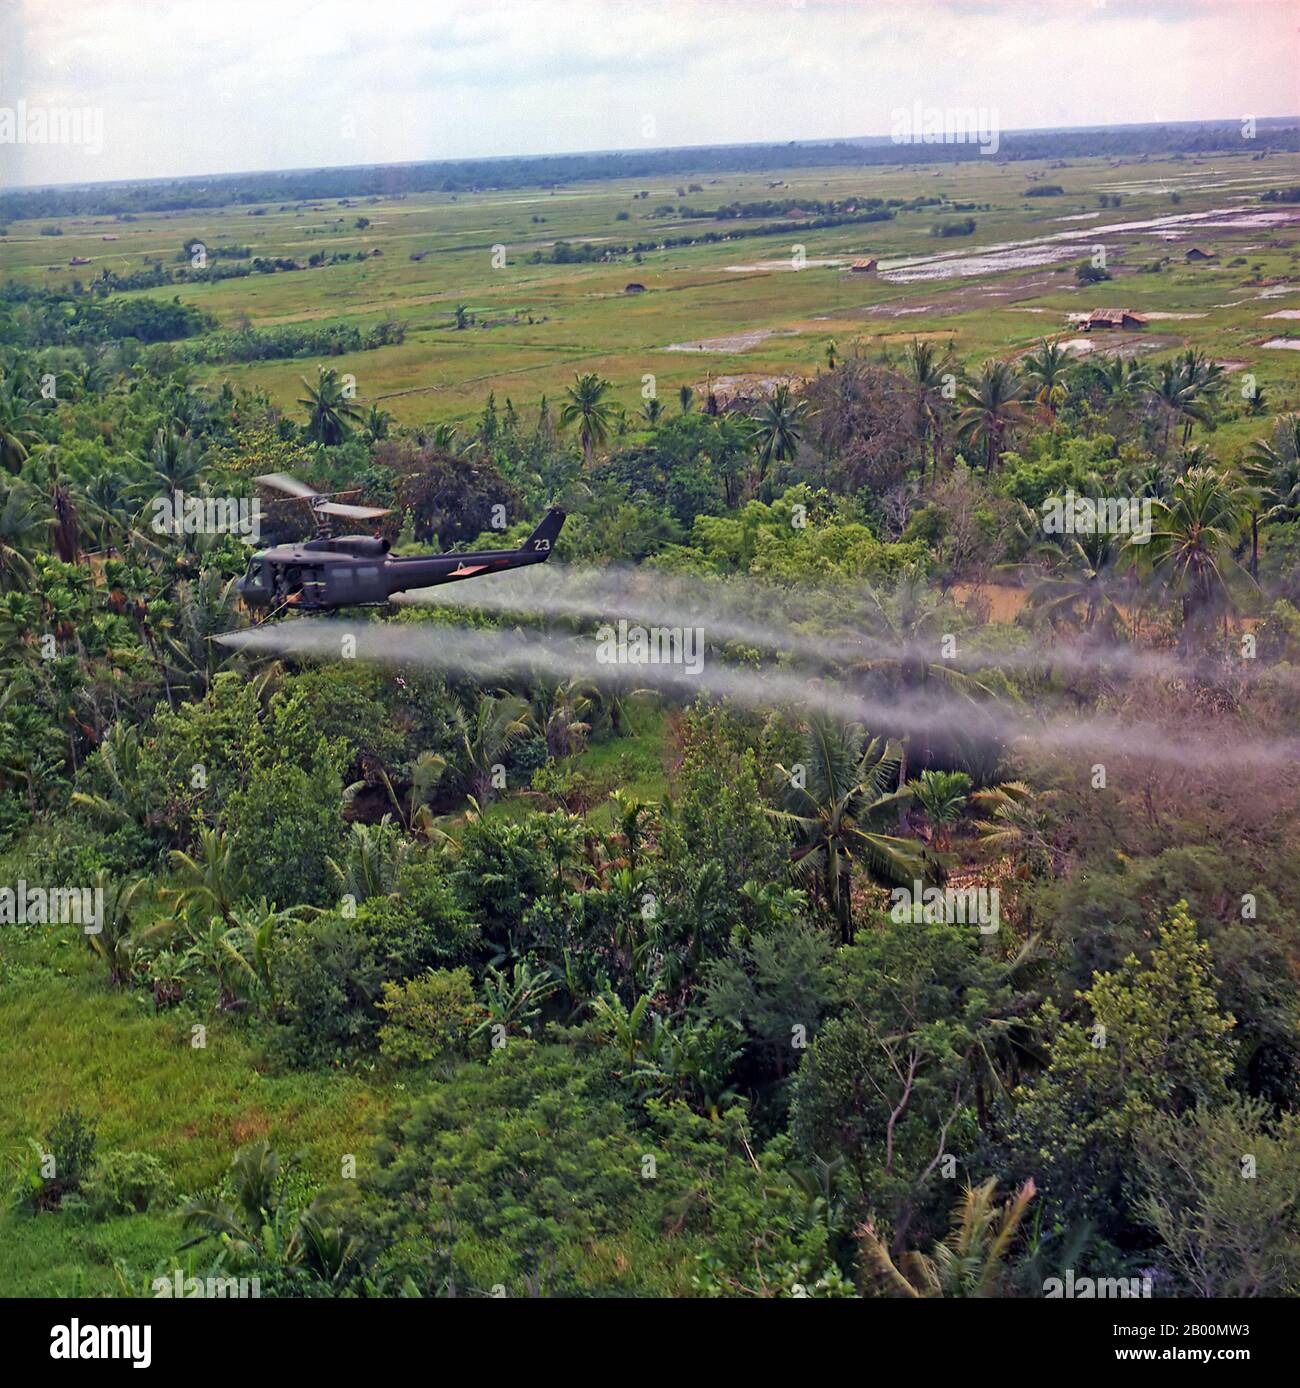 Vietnam: A UH-1D helicopter from the 336th Aviation Company sprays a defoliation agent on a dense jungle area in the Mekong Delta.  During the Vietnam War, between 1962 and 1971, the United States military sprayed 20,000,000 US gallons (80,000,000 L) of chemical herbicides and defoliants in Vietnam, eastern Laos and parts of Cambodia, as part of Operation Ranch Hand. The program's goal was to defoliate forested and rural land, depriving guerrillas of cover; another goal was to induce forced draft urbanization, destroying the ability of peasants to support themselves in the countryside. Stock Photo